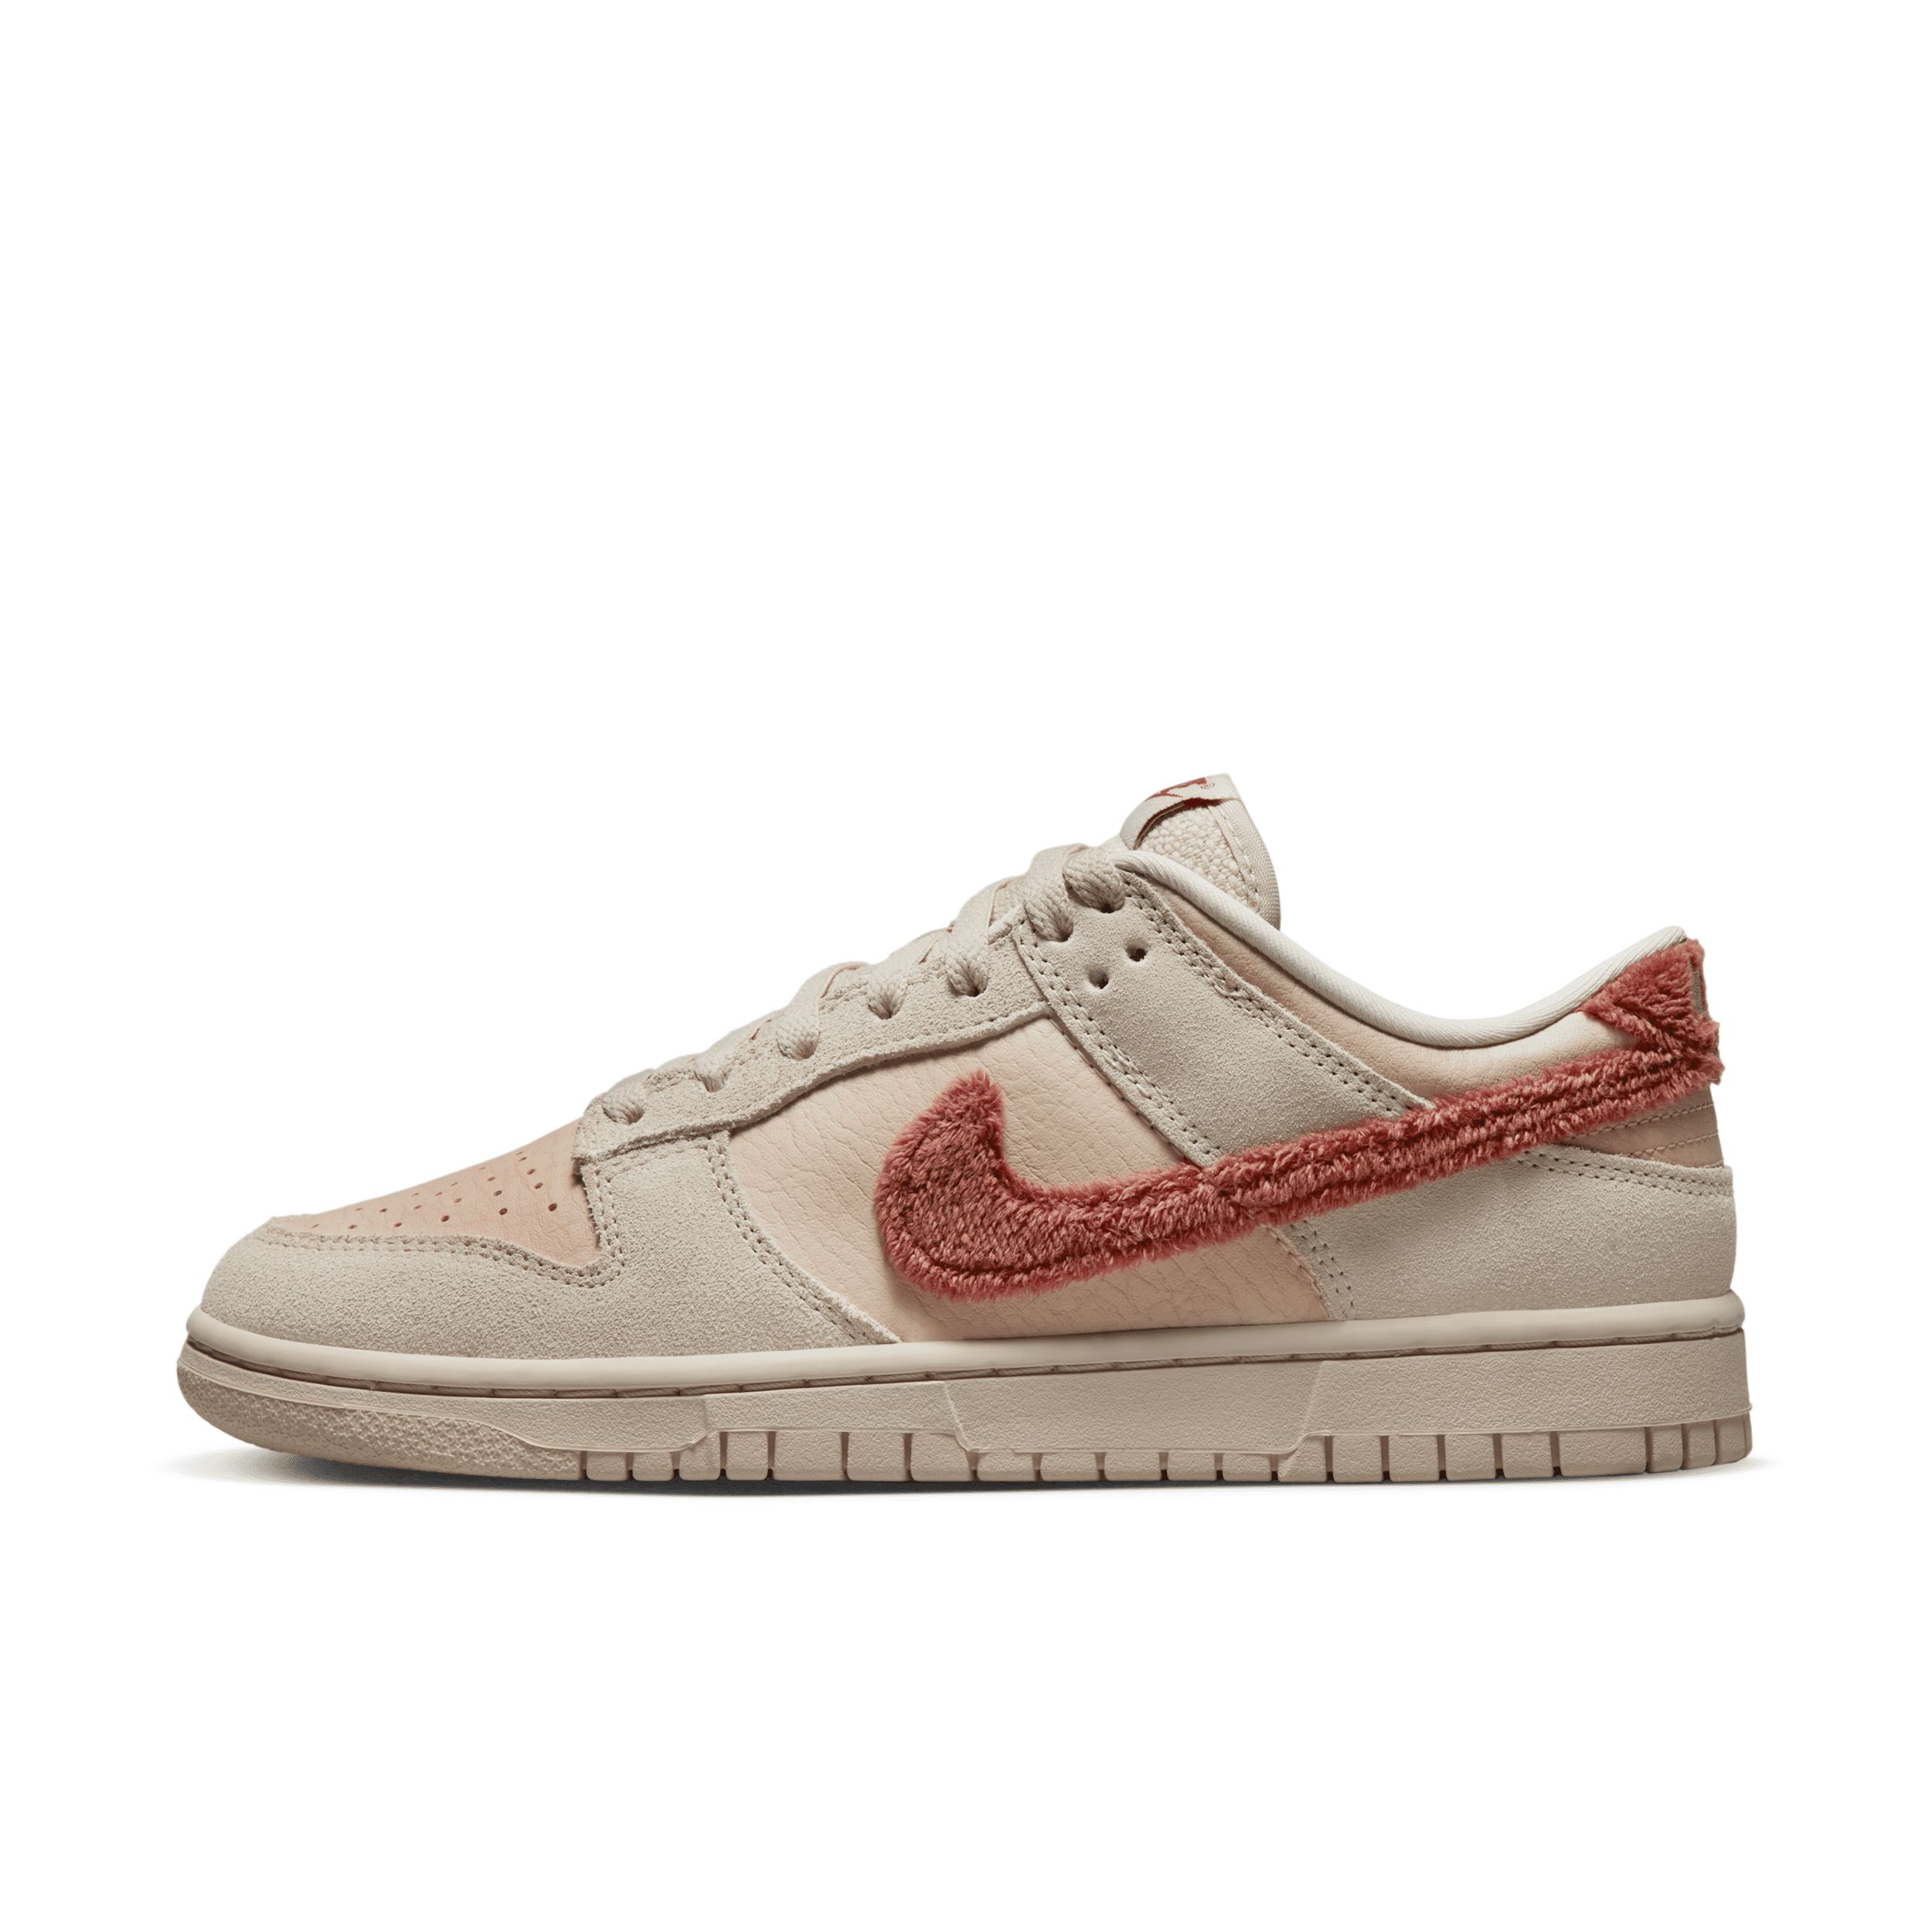 Nike Women's Dunk Low Shoes in Brown, Size: 9.5 | DZ4706-200 | Nike (US)